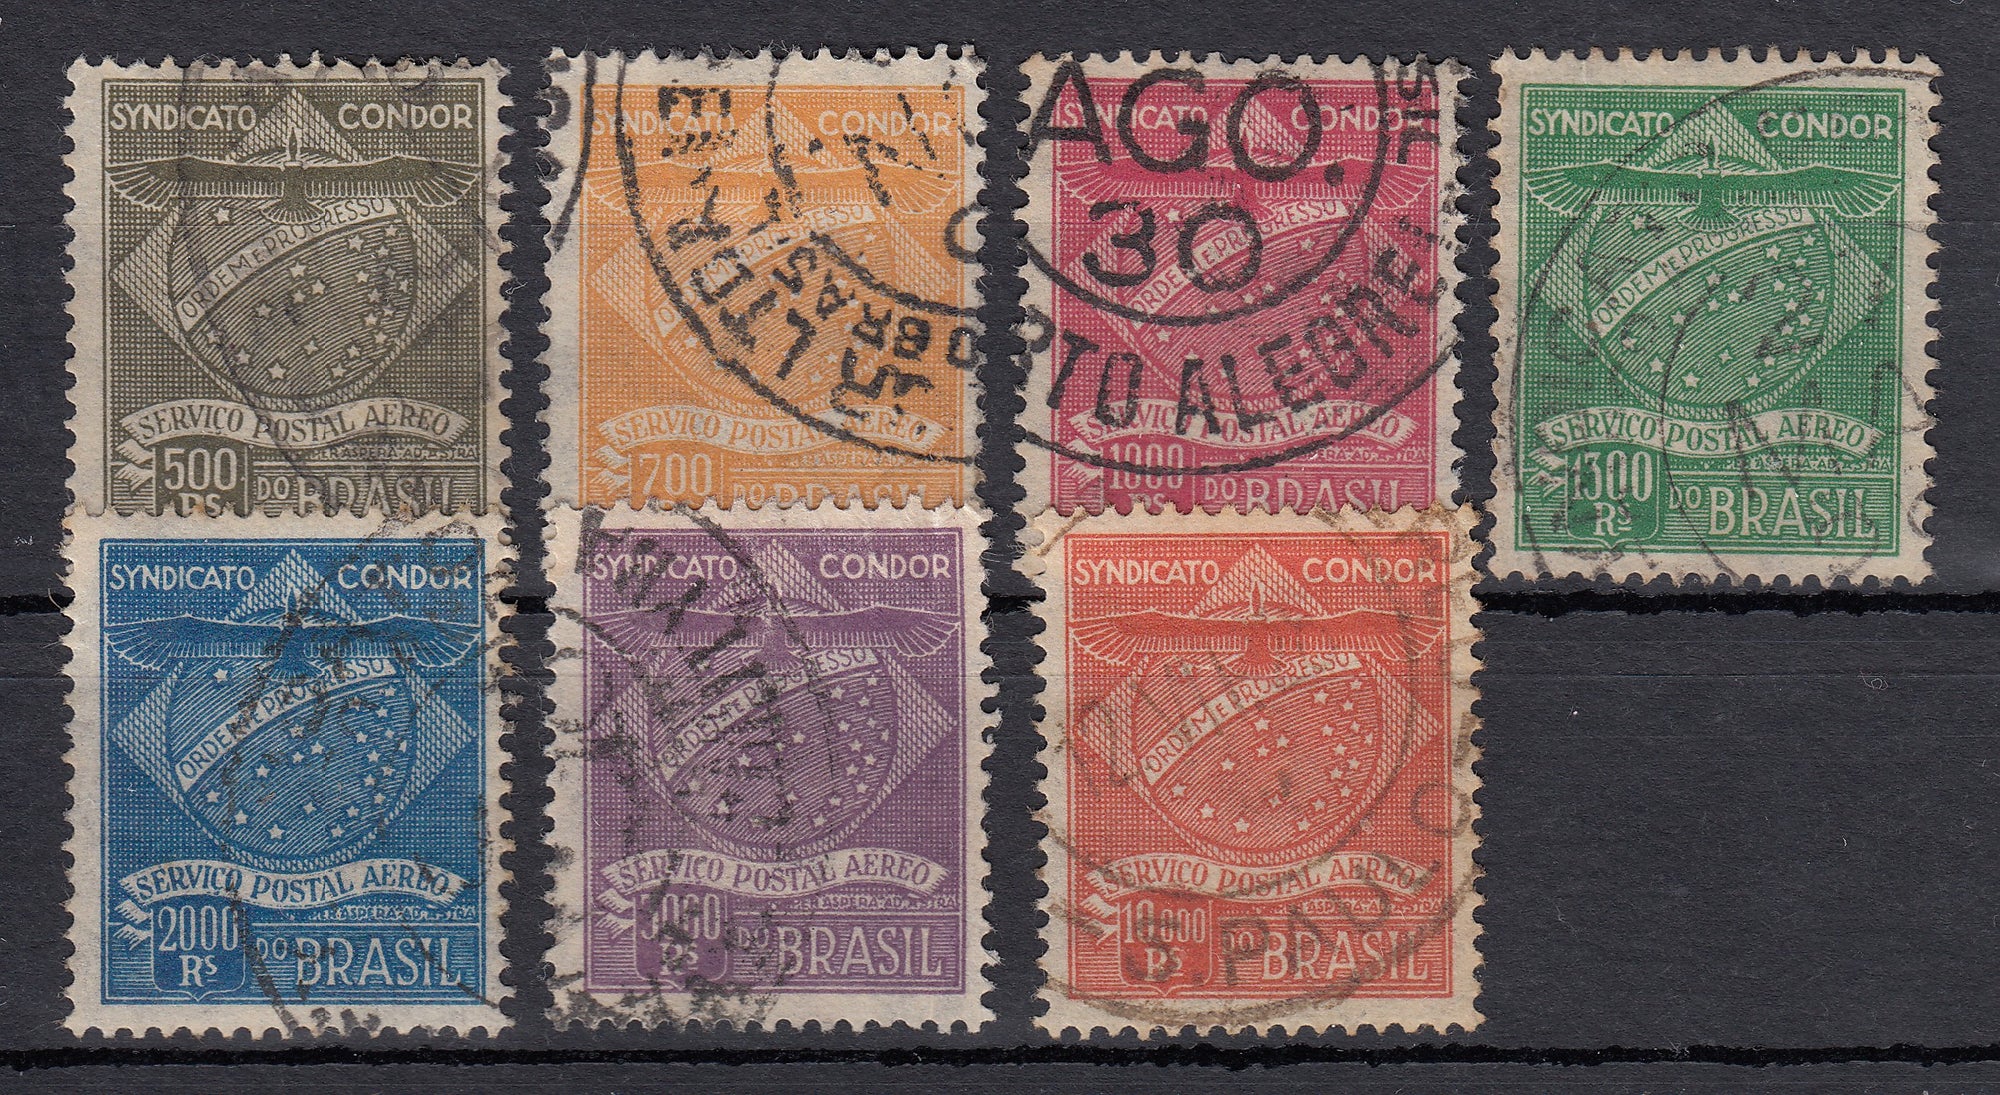 Brazil 1927 Syndicato Condor Complete Airmail Set Used. Scott 1CL1-1CL7